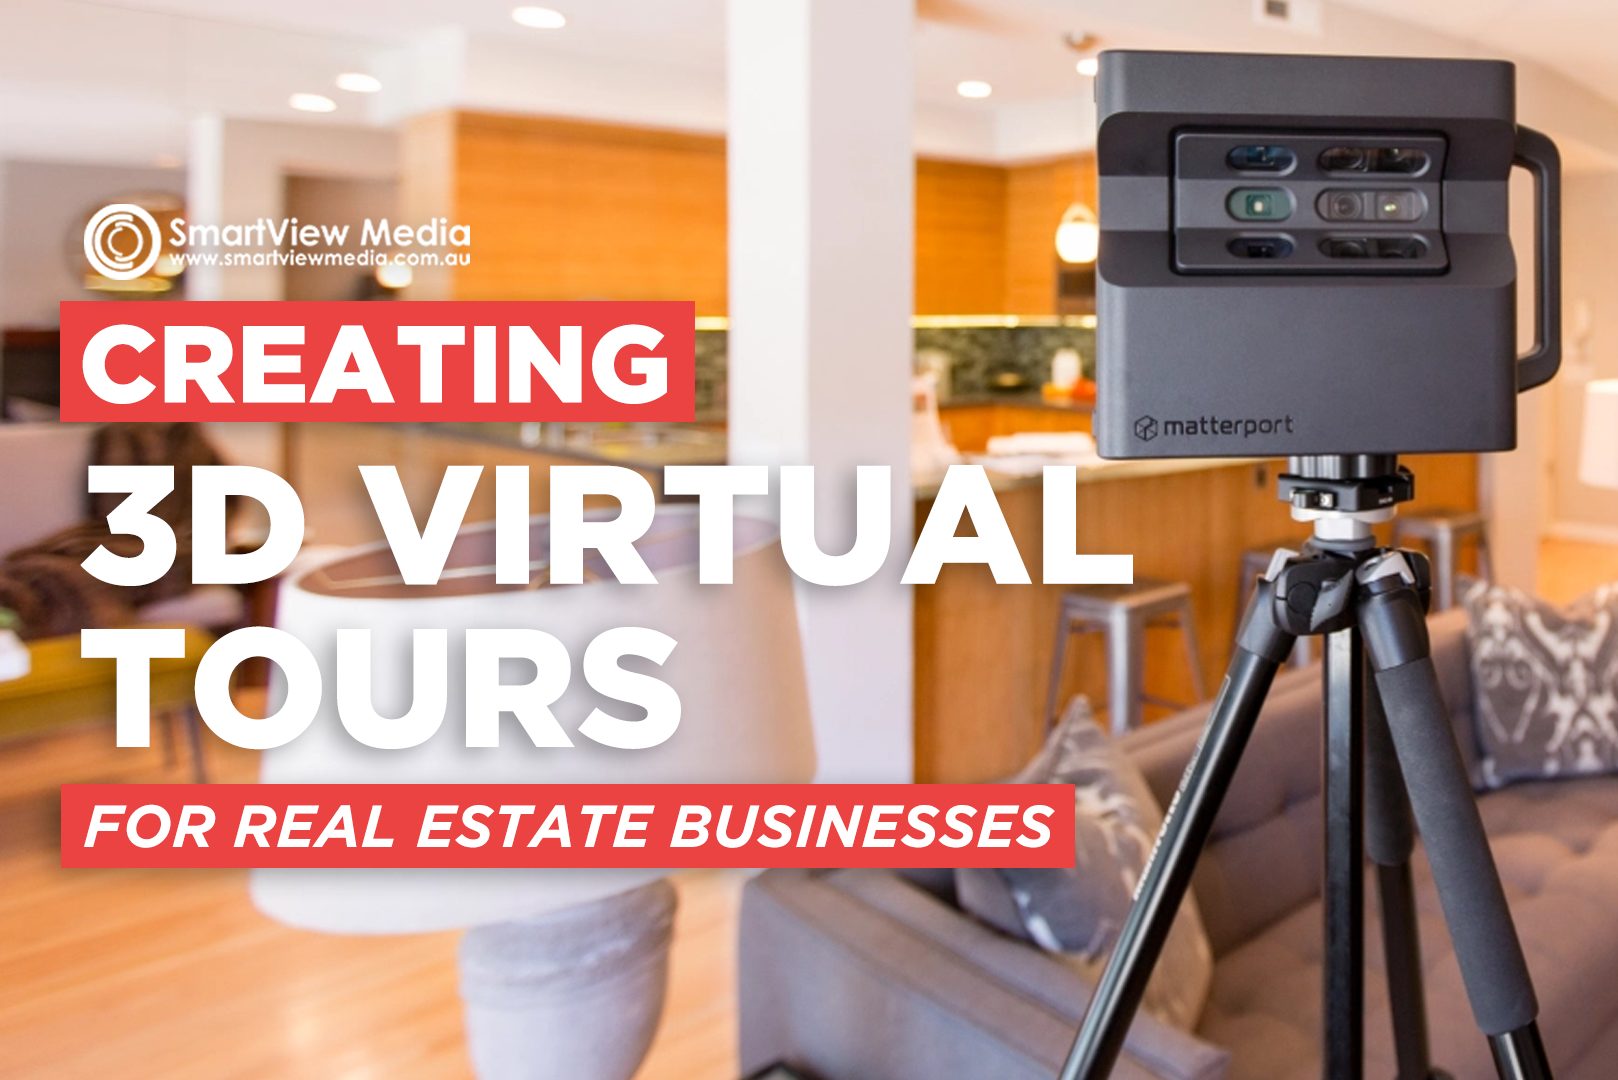 SmartView Media - Creating 3D Virtual Tours for Real Estate Businesses